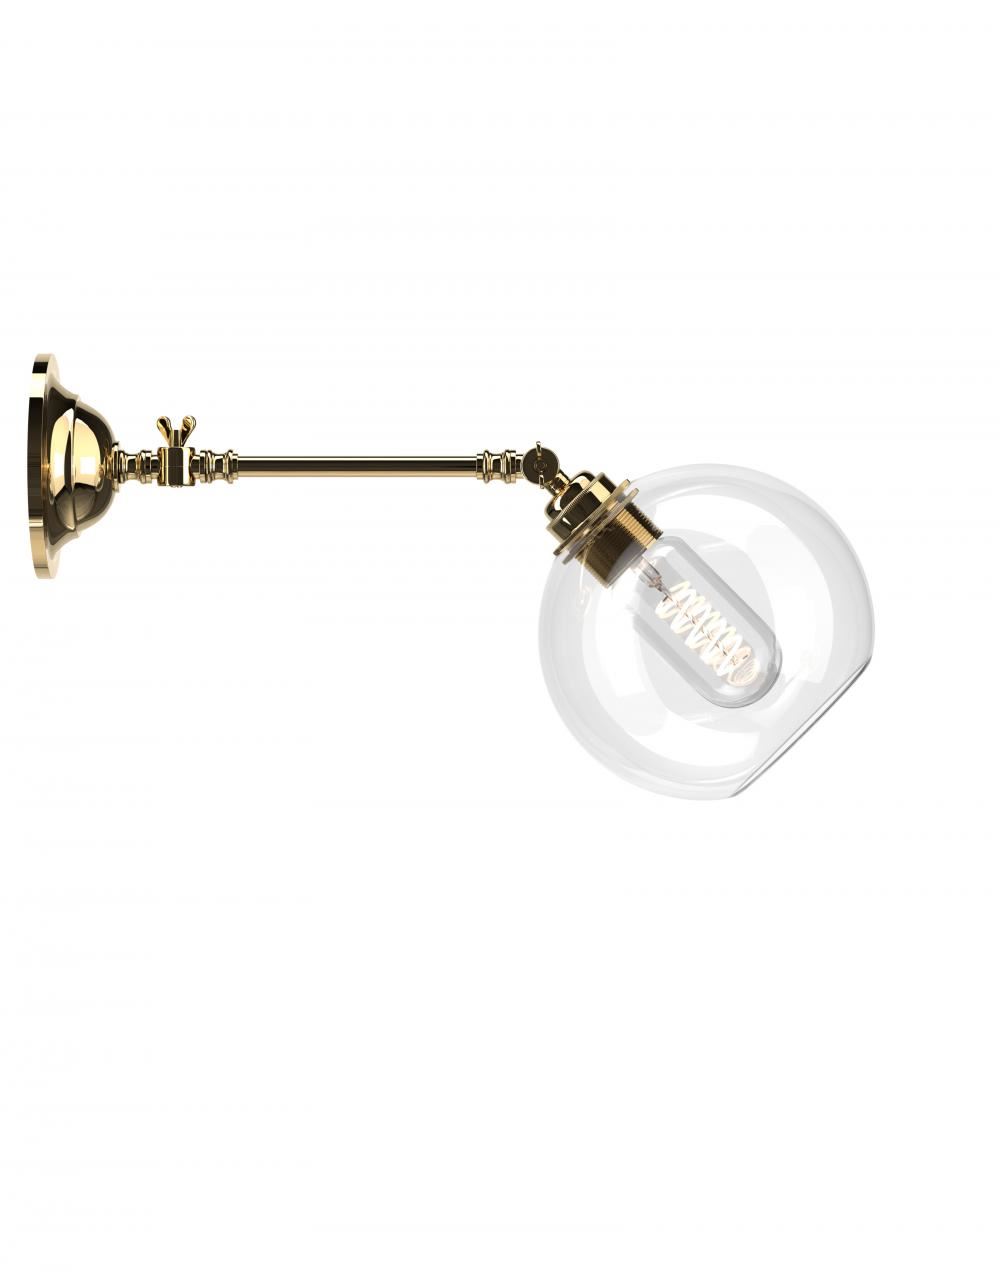 Fritz Fryer Hereford Adjustable Reading Light Medium Clear Polished Brass Wall Lighting Clear